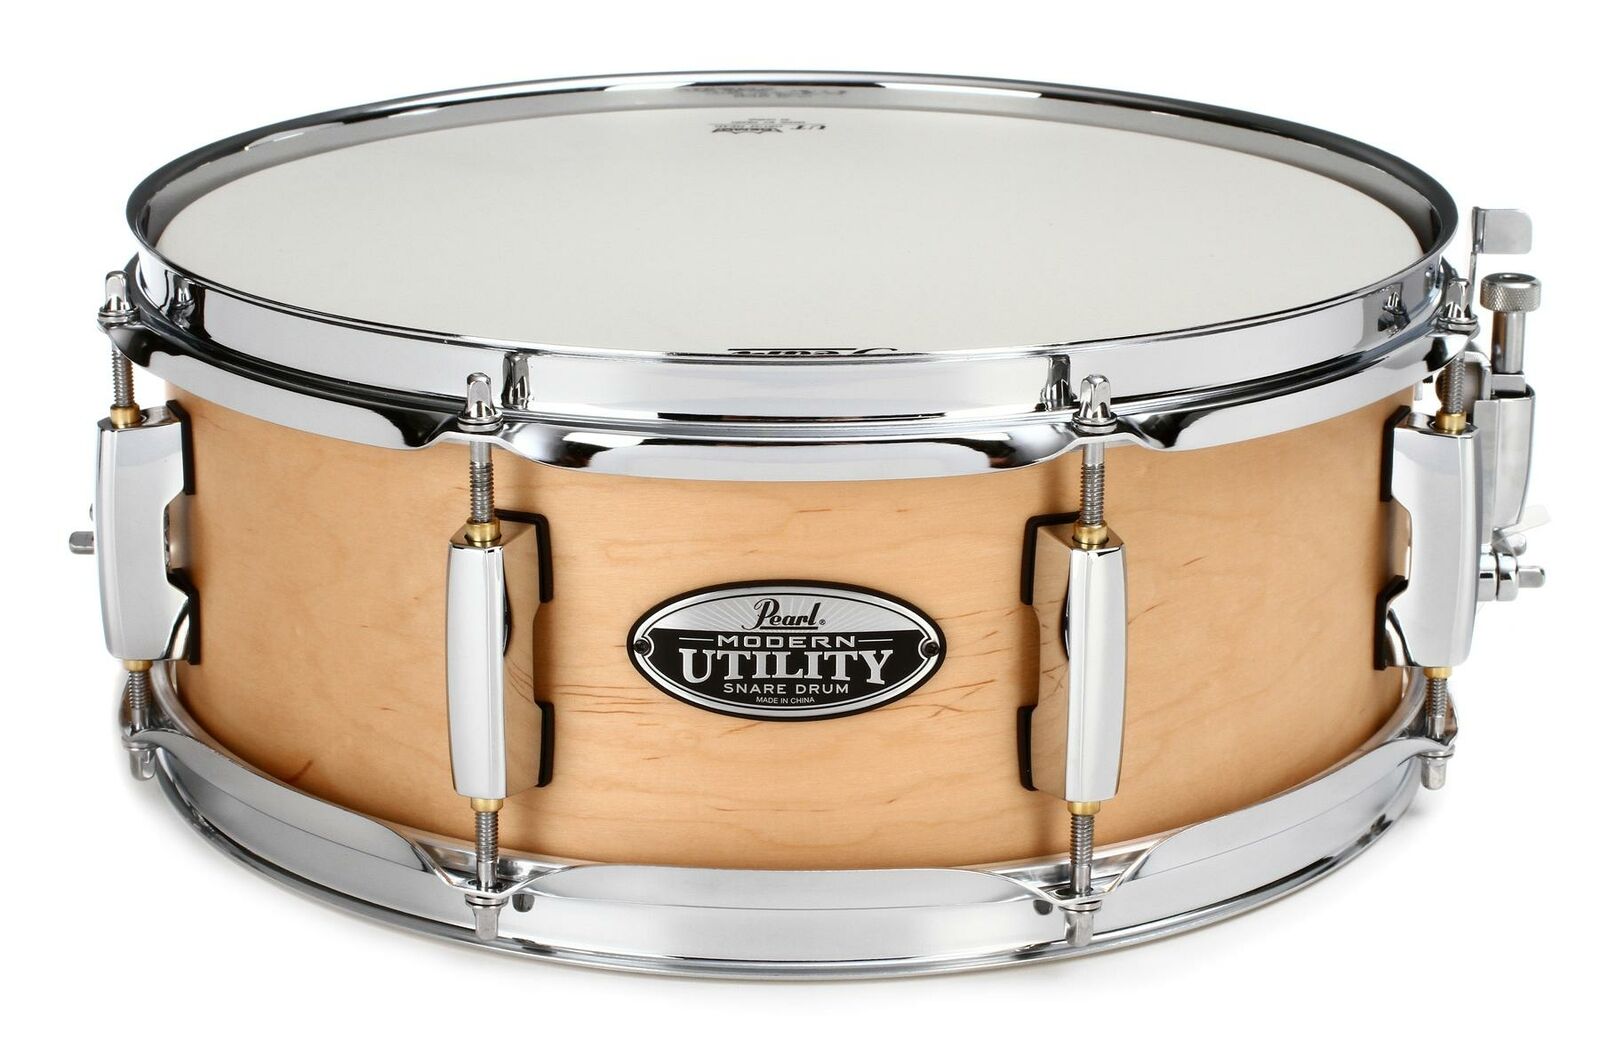 PEARL Modern Utility Maple 13" x 5" Snare Drum (Available in 2 colors)